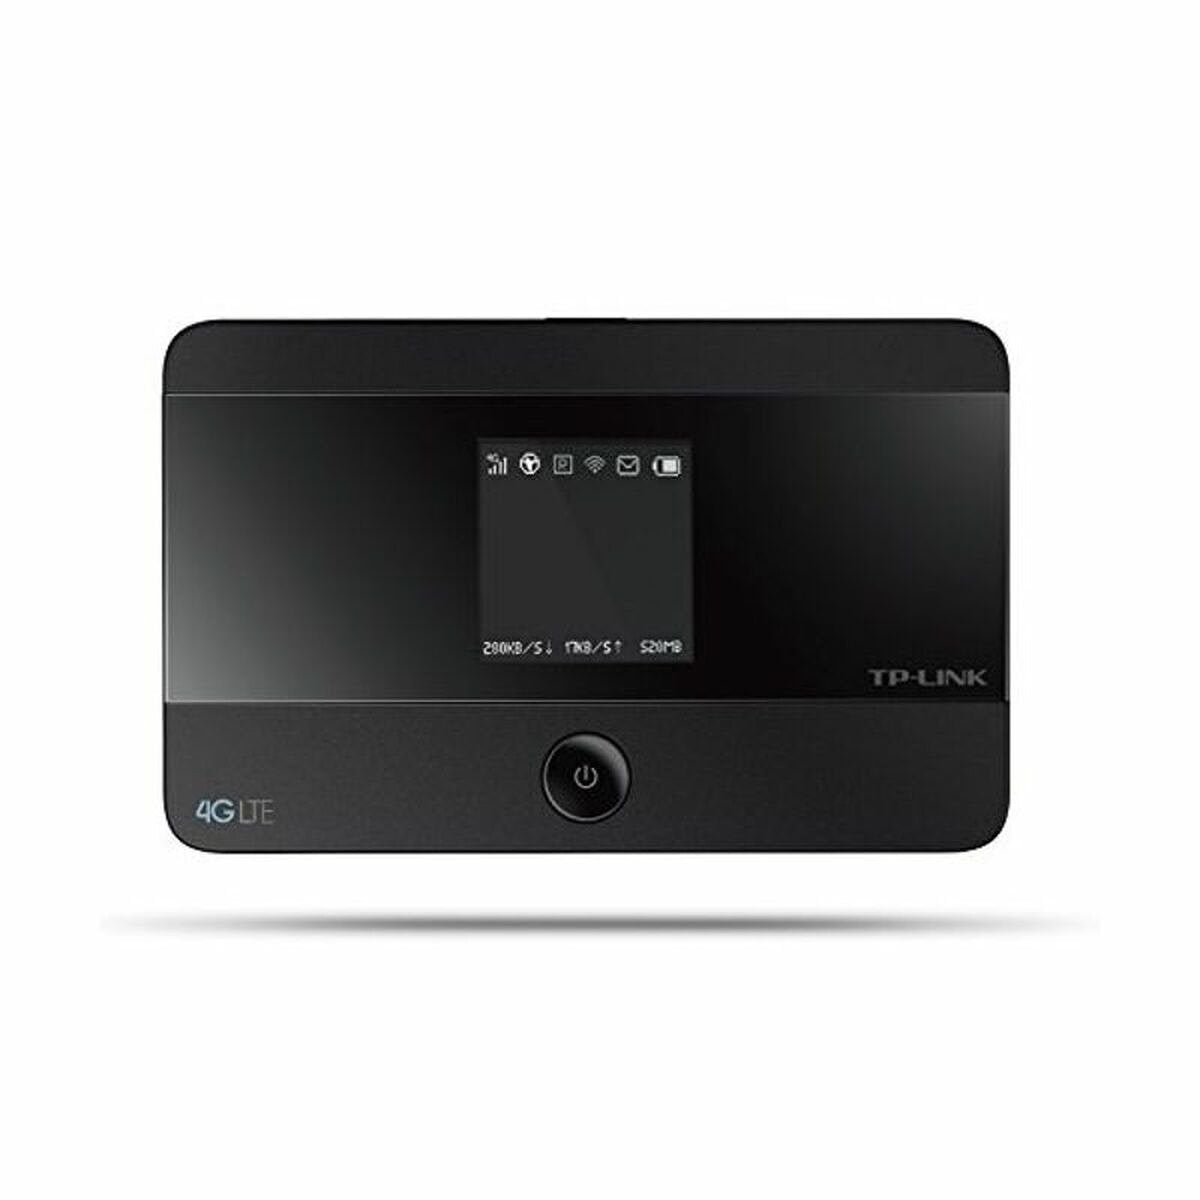 Draagbare Dubbele 4G LTE-Wi-Fi-Router TP-Link M7350 150 Mbps/50 Mbps 2.4 GHz/5 GHz 2000 mAh